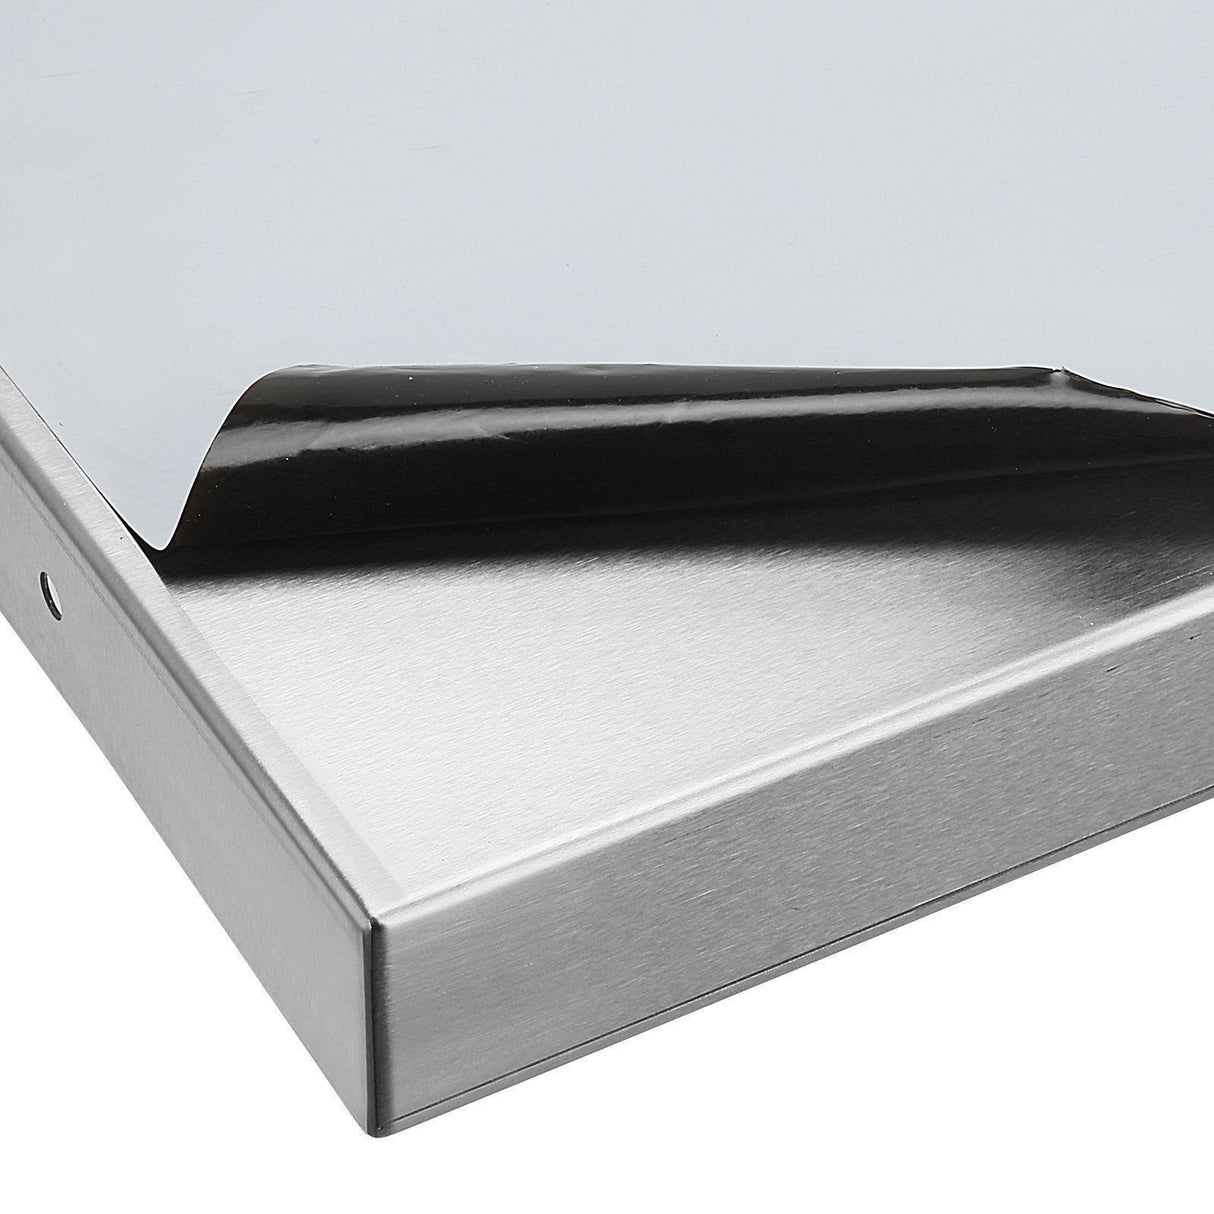 Empire Stainless Steel Wall Shelf 1800 x 300mm with Brackets & Fixings - WS-1800 Stainless Steel Wall Shelves Empire   